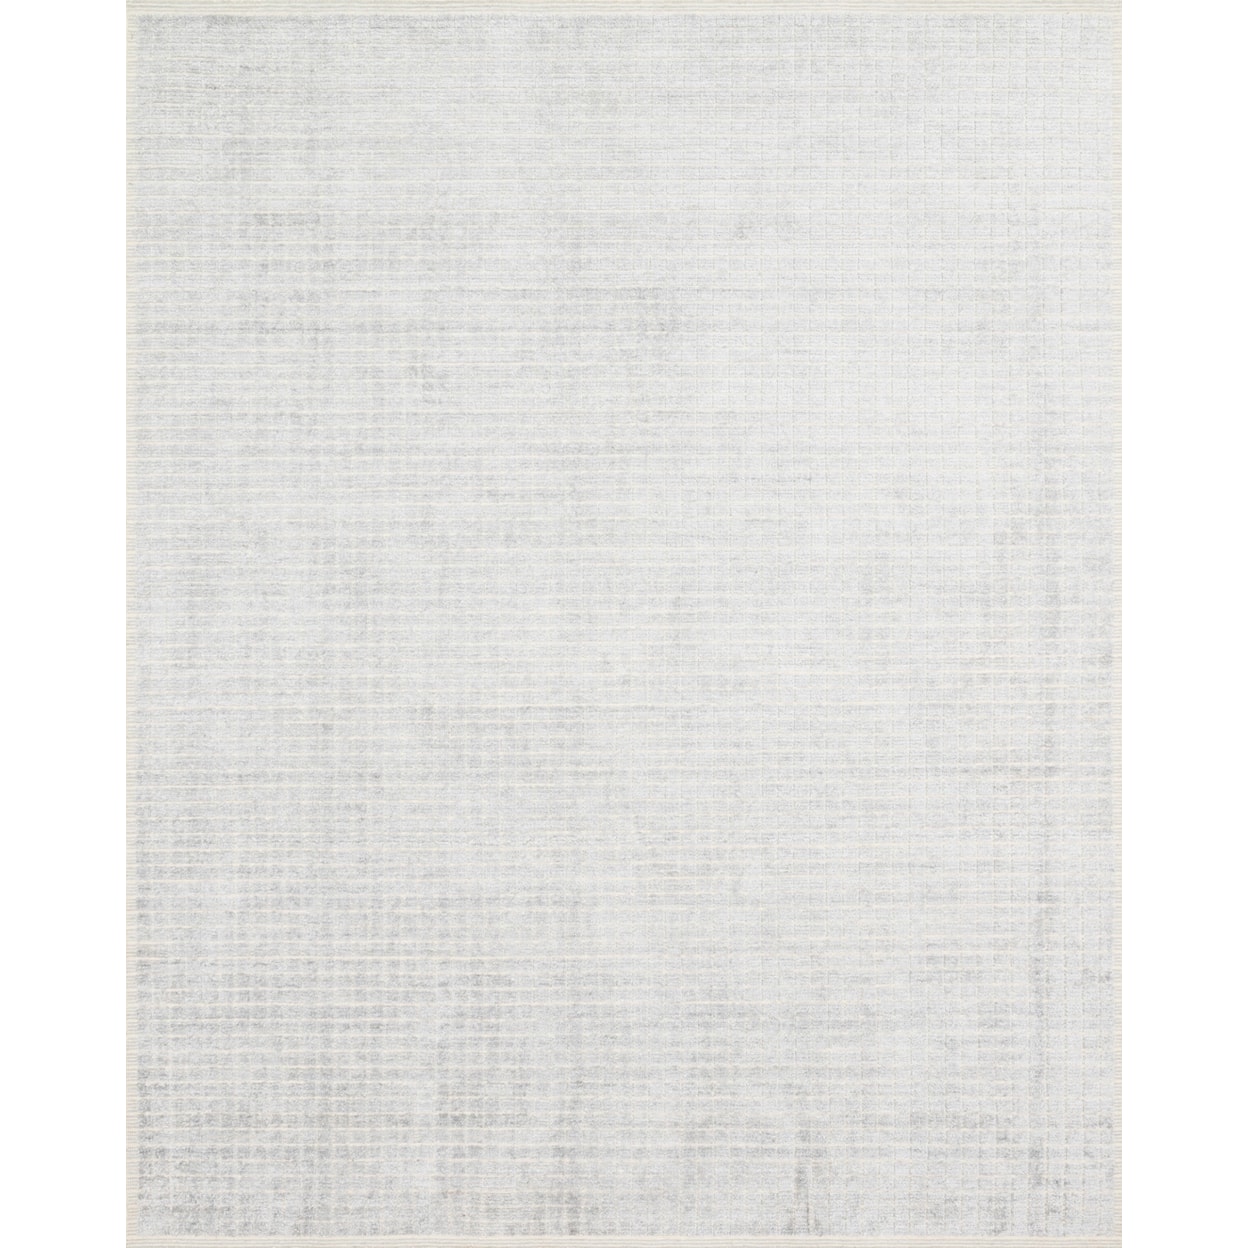 Reeds Rugs Beverly 8'6" x 11'6" Silver / Sky Rug